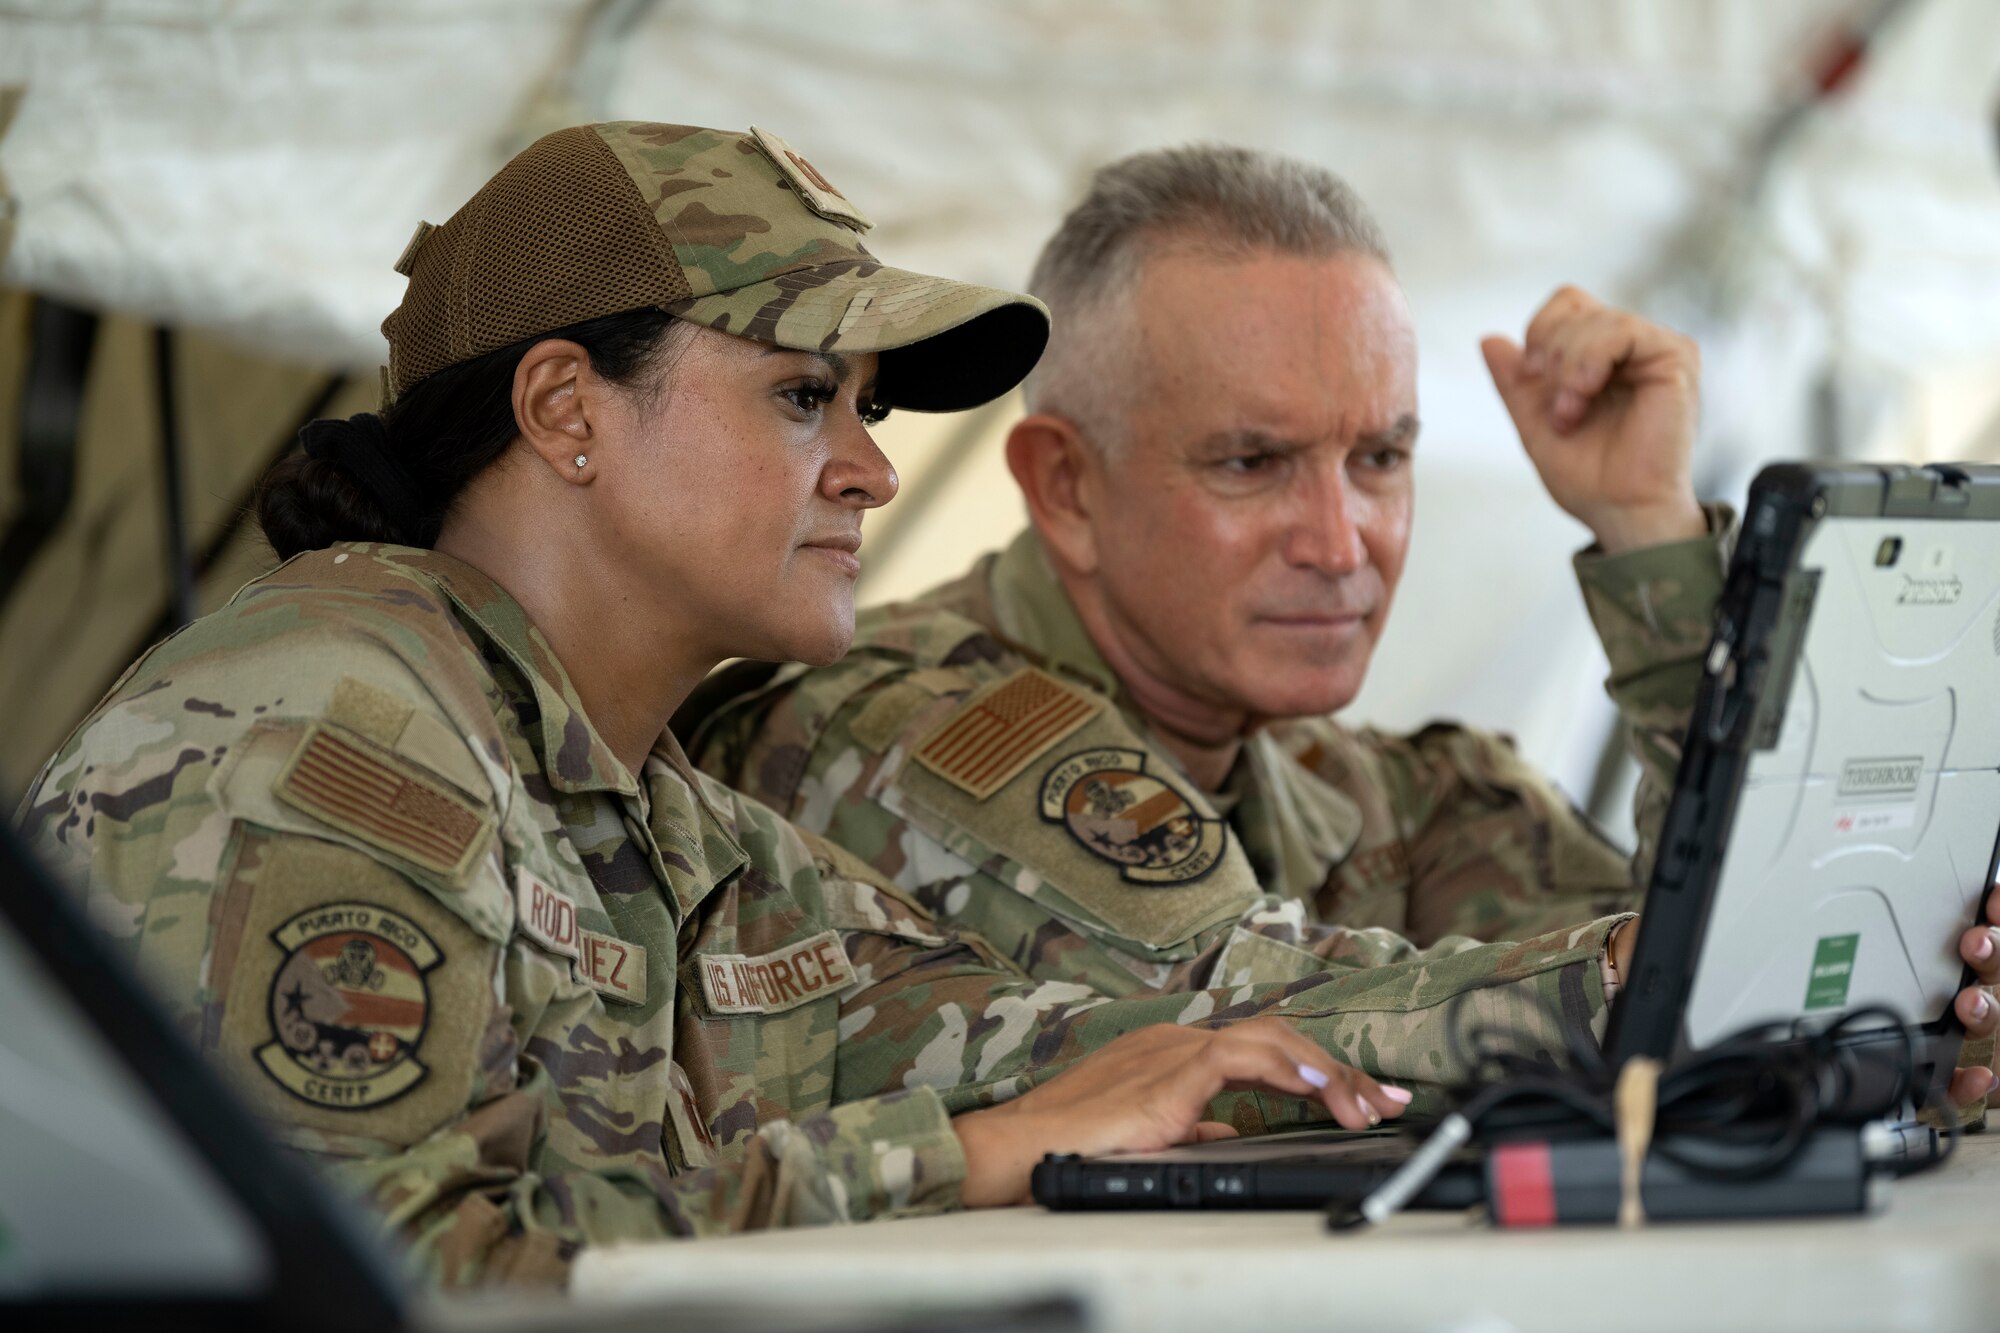 From left, U.S. Air Force Capt. Ileana Rodriguez, a pharmacist and Lt. Col. Robert Shleier, a medical provider, both assigned to the 156th Medical Group, Detachment 1, operate a computer during a collective training exercise at Camp Santiago Joint Training Center, Salinas, Puerto Rico, Aug. 10, 2023. The exercise allowed service members assigned to the 156th Medical Group, 123rd Medical Group and the Puerto Rico Army National Guard to exchange knowledge and implement the National Guard CBRN Response Enterprise Information Management System, which assists with accelerating data collection from search and extraction teams in emergency events. (U.S. Air National Guard photo by Master Sgt. Rafael D. Rosa)